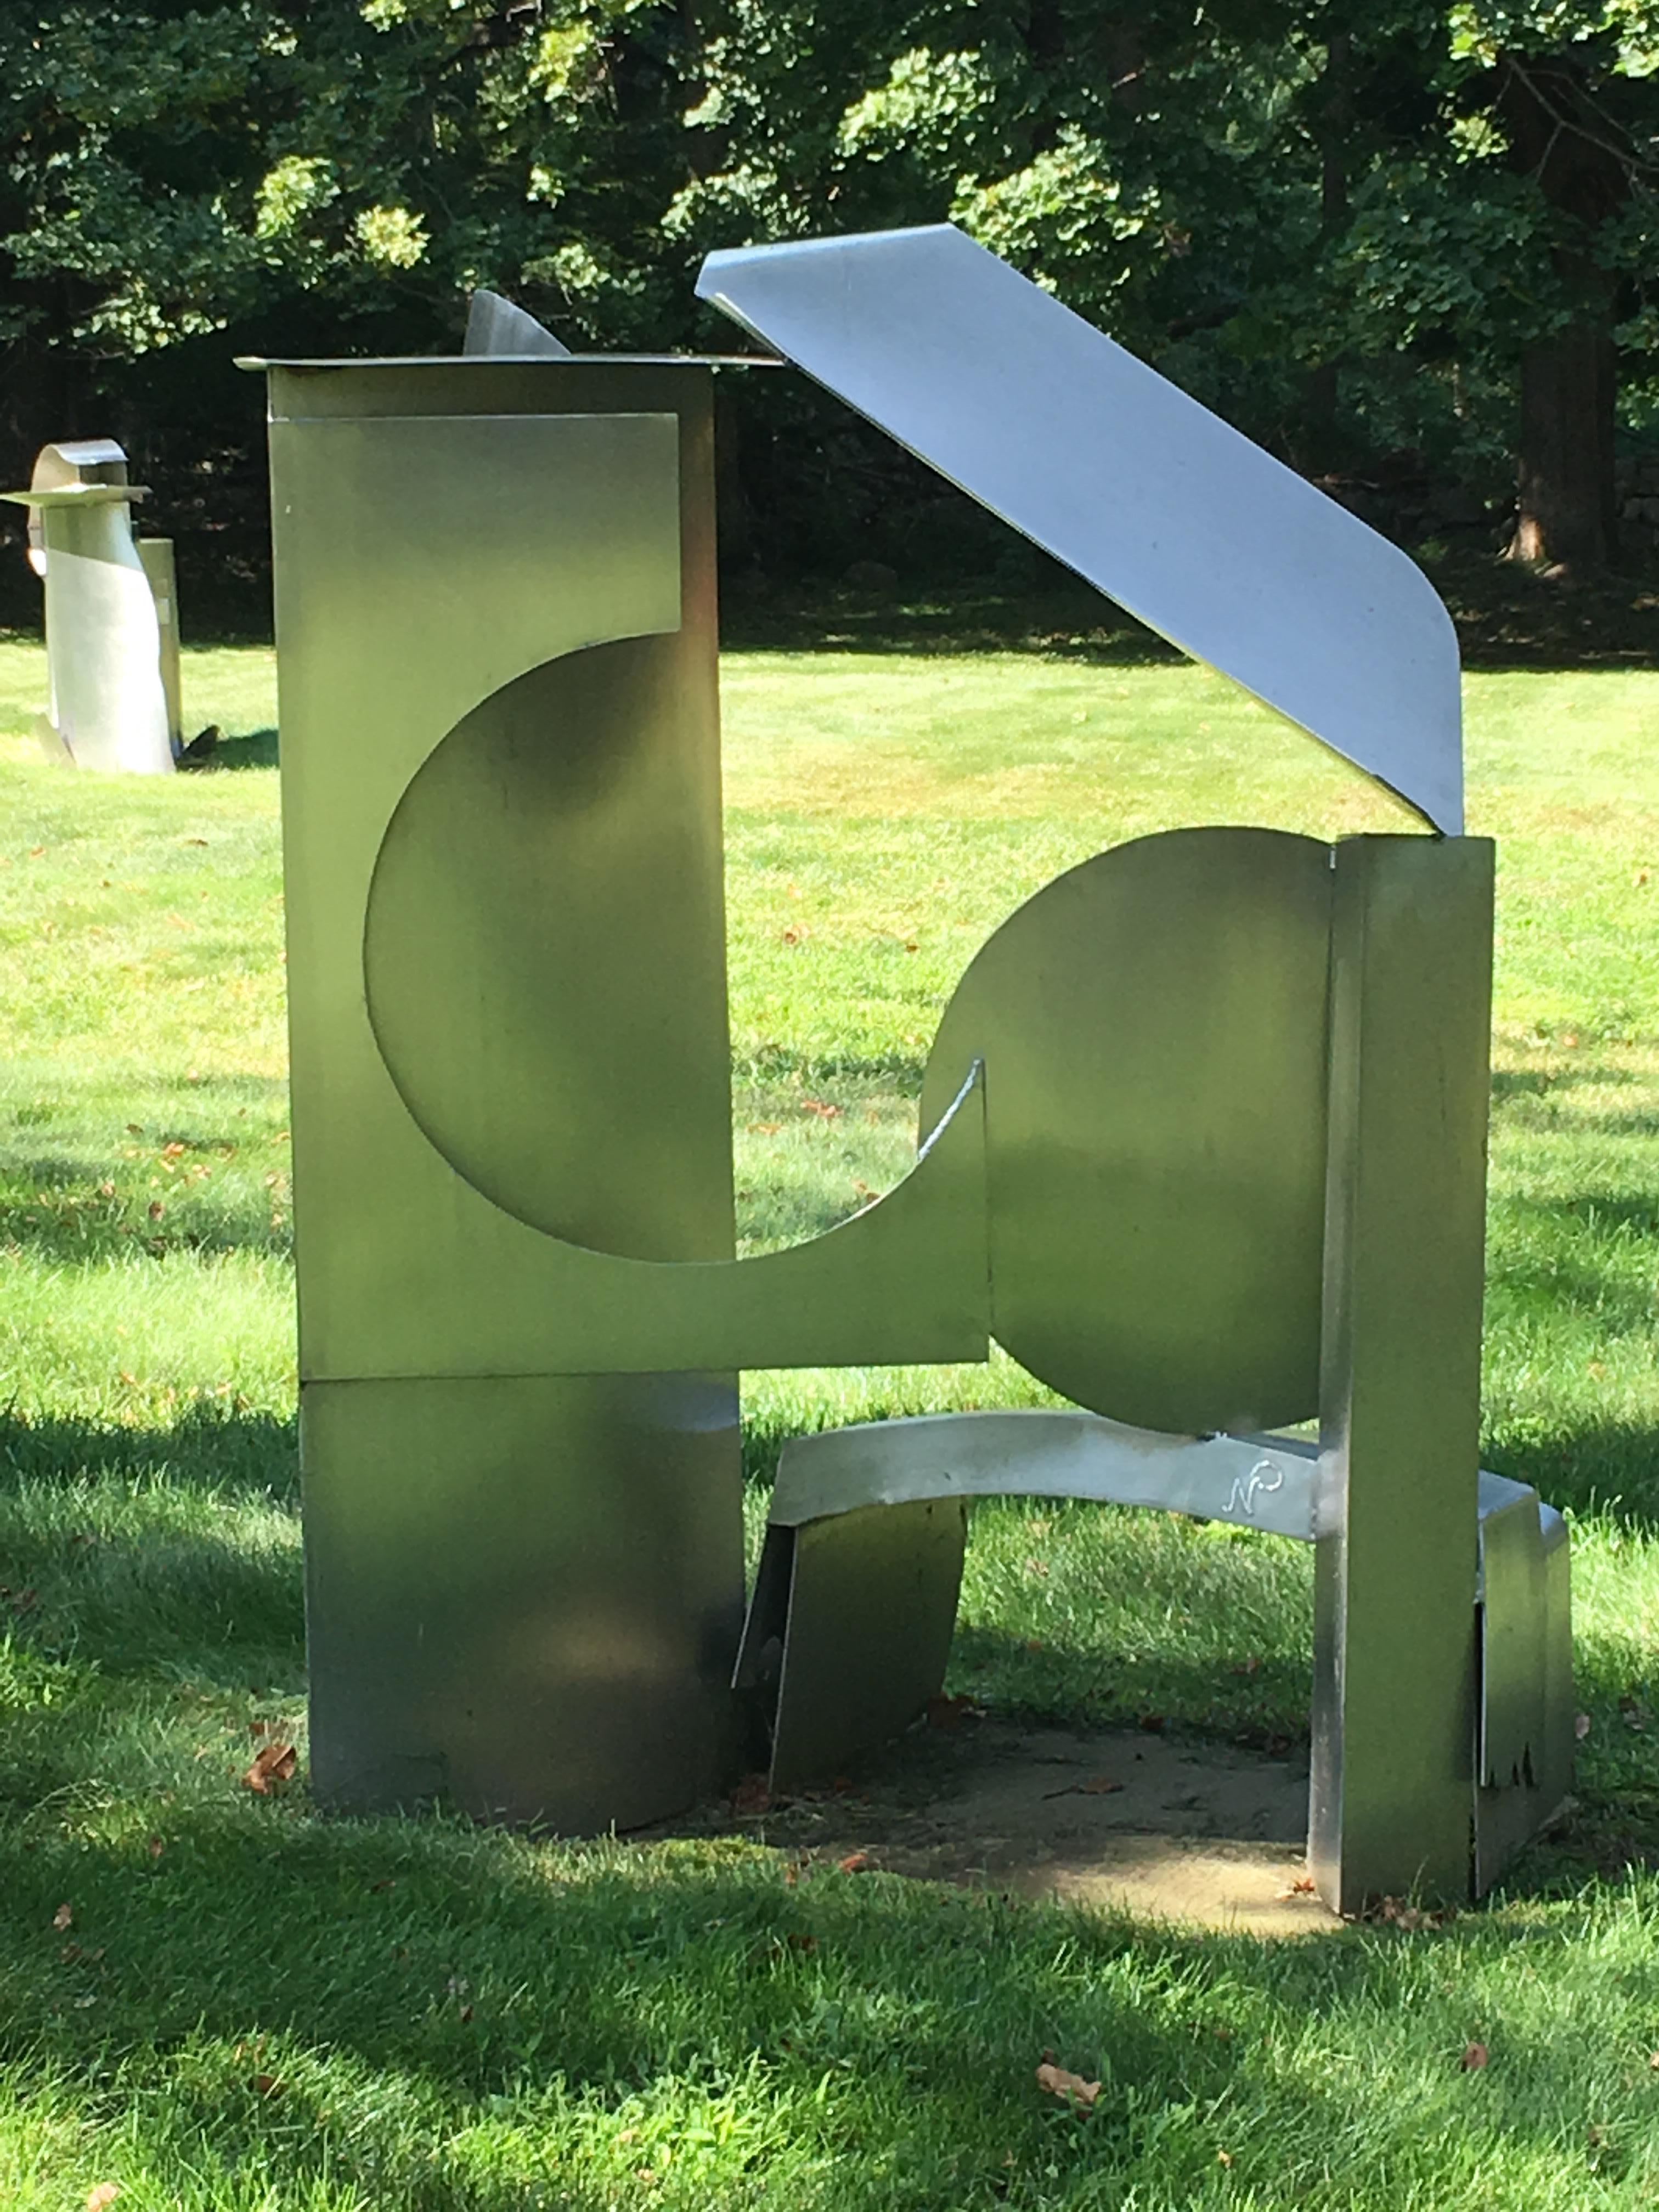 Naomi Press Abstract Sculpture - Untitled VIII : large-scale steel sculpture